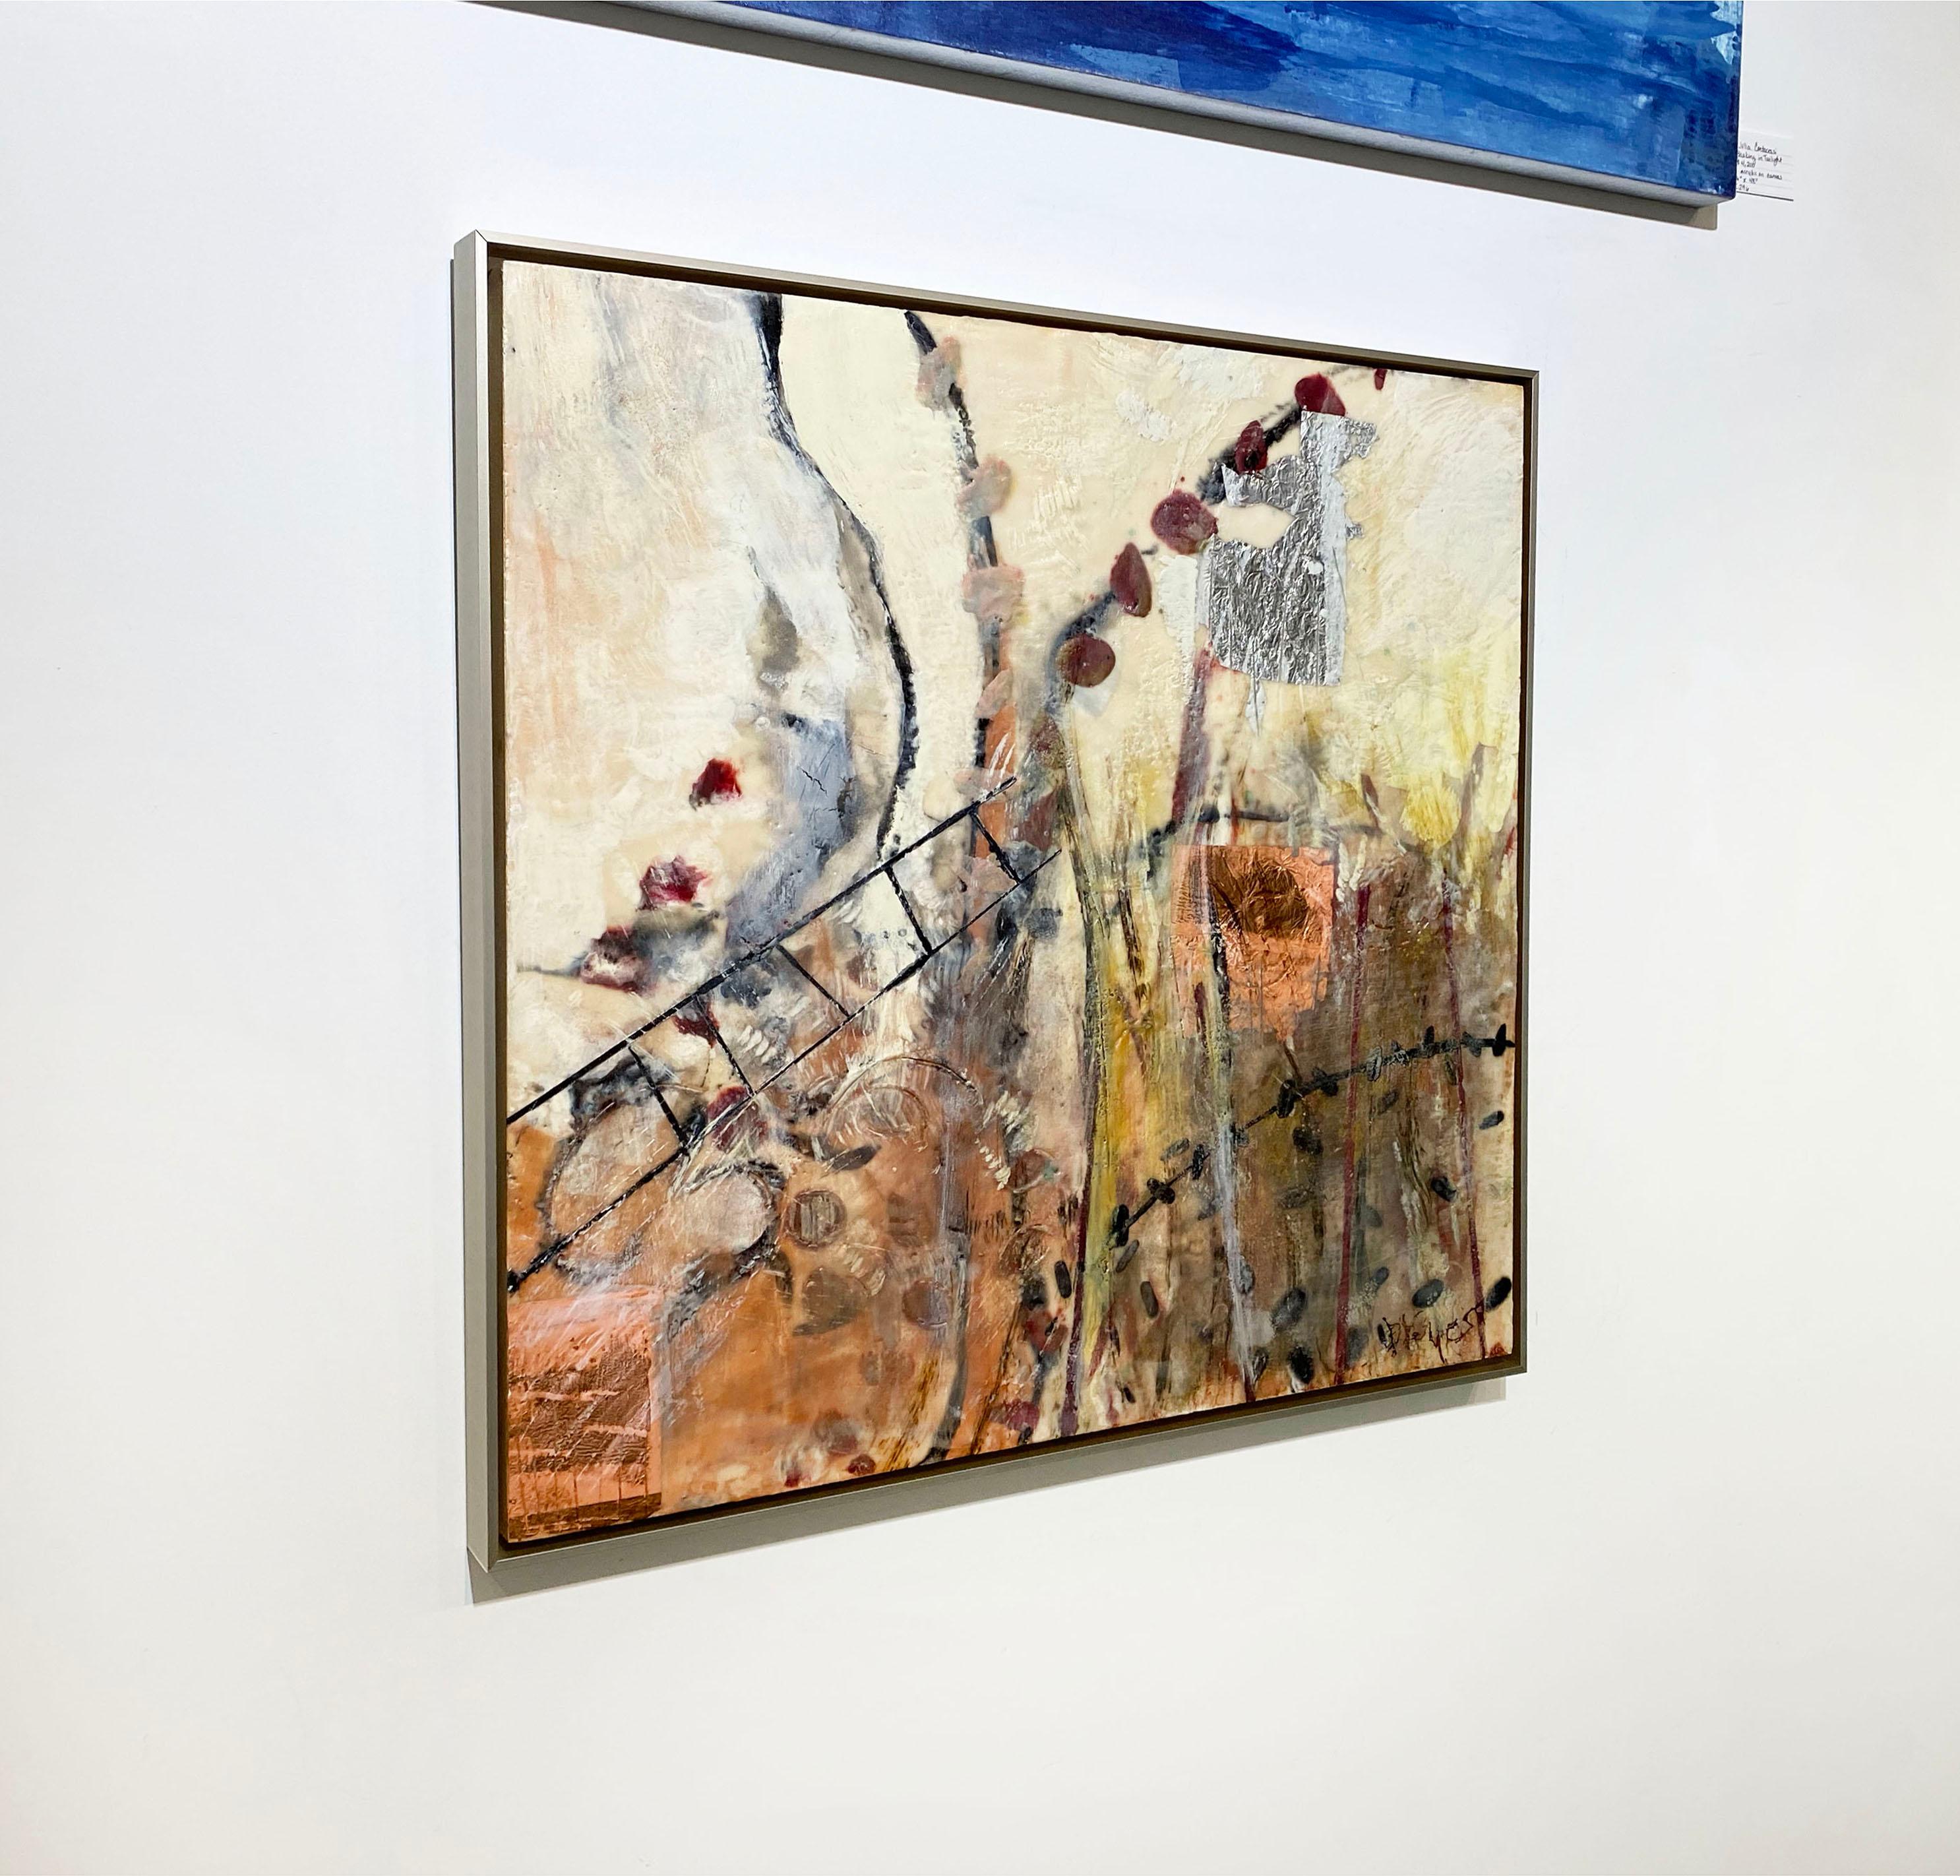 This encaustic painting with copper and silver leaf on board measures 30